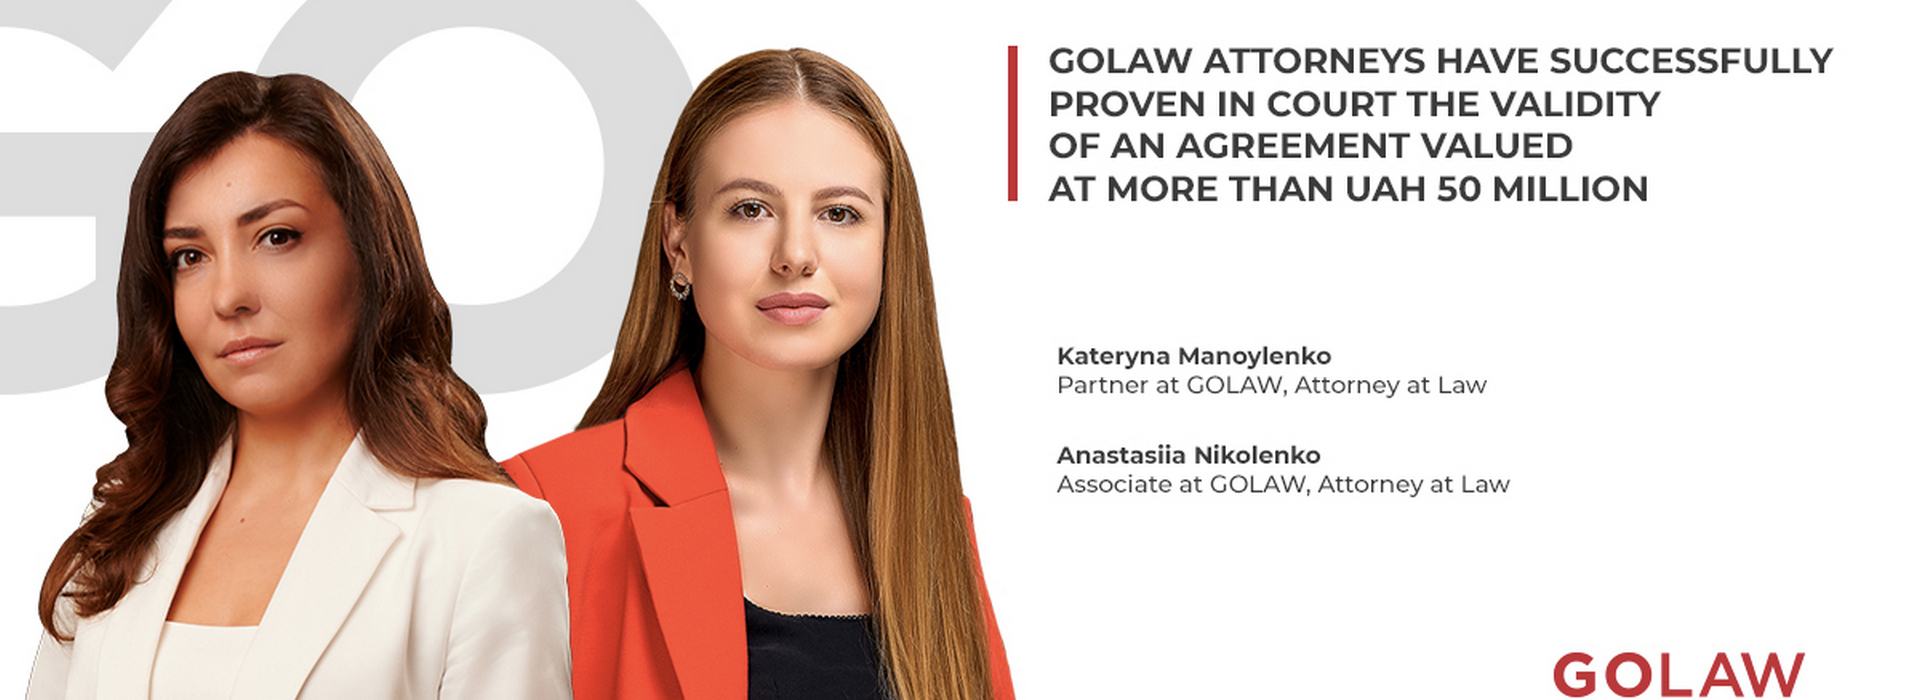 GOLAW Attorneys Have Successfully Proven in Court the Validity of an Agreement Valued at More Than UAH 50 Million